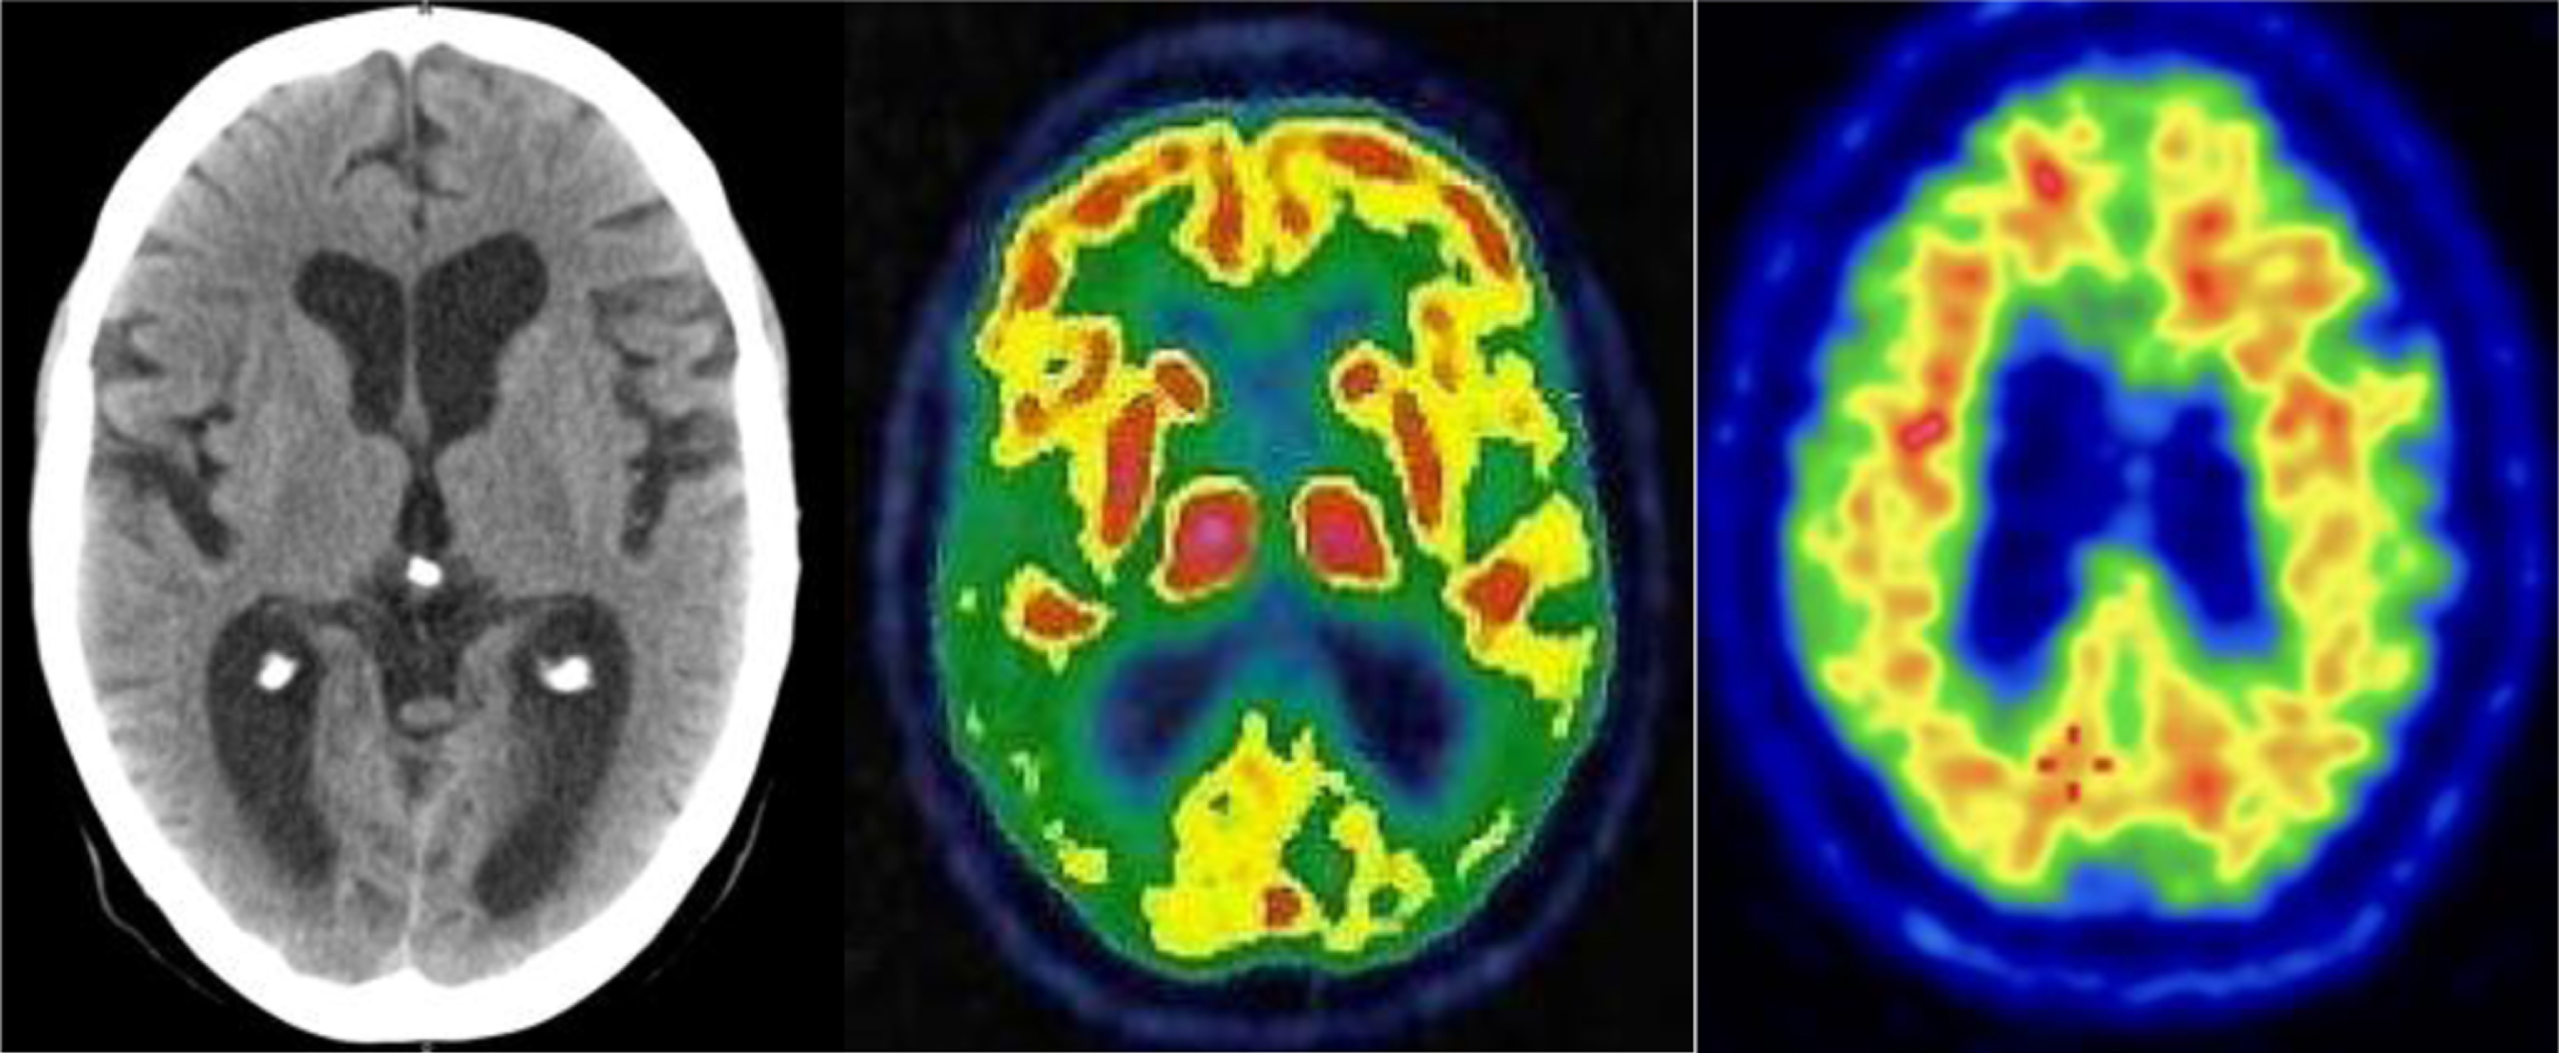 Neuroimaging findings. From left to right: CT, FDG-PET, and Amyloid PET with flutemetamol of the patient consistent with the diagnosis of PCA due to AD.